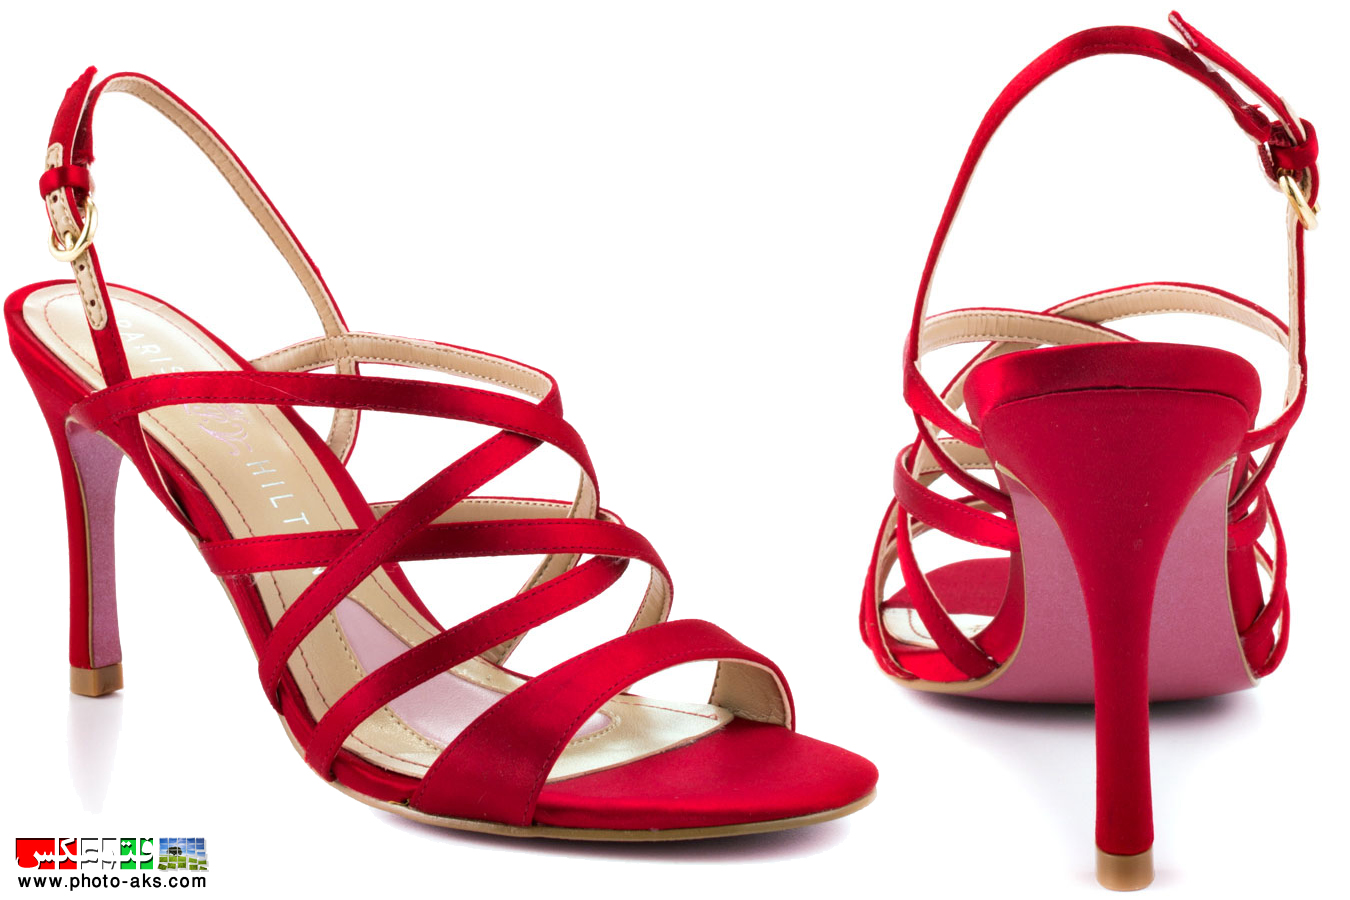 http://pic.photo-aks.com/photo/images/fashion/shoes/large/red_prom_shoes_womens.jpg